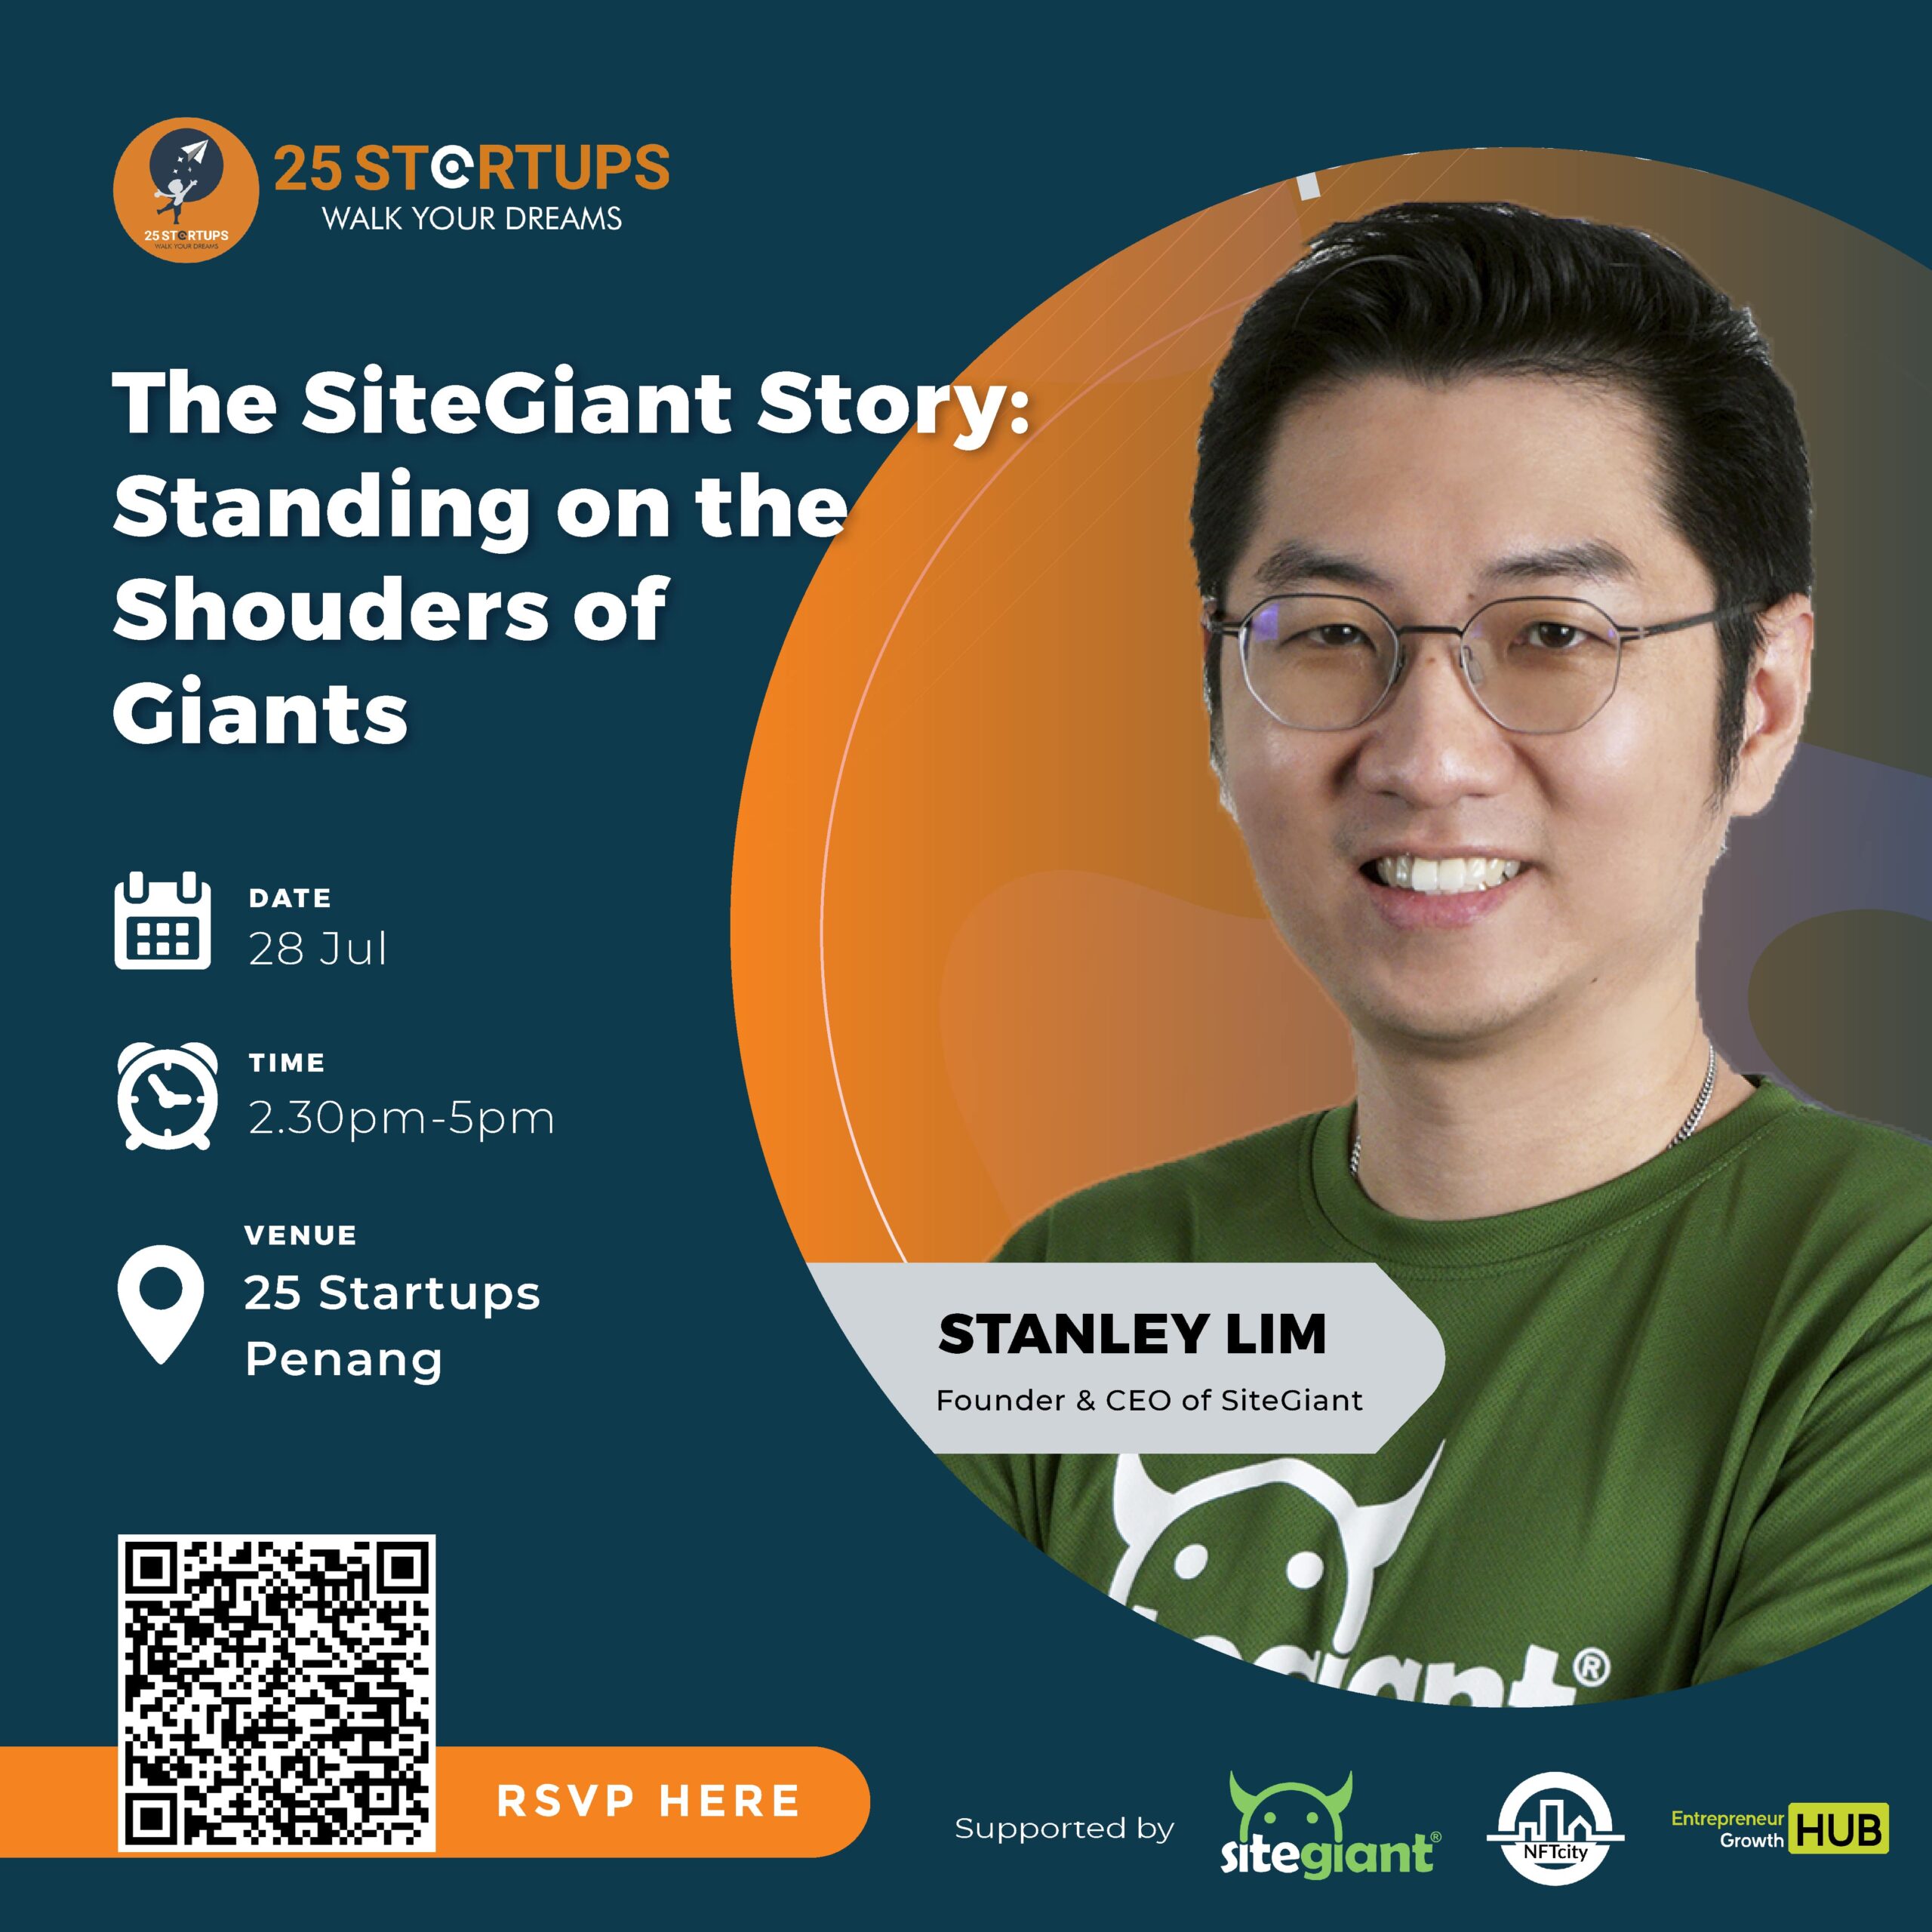 The SiteGiant Story: Standing on the Shoulders of Giants